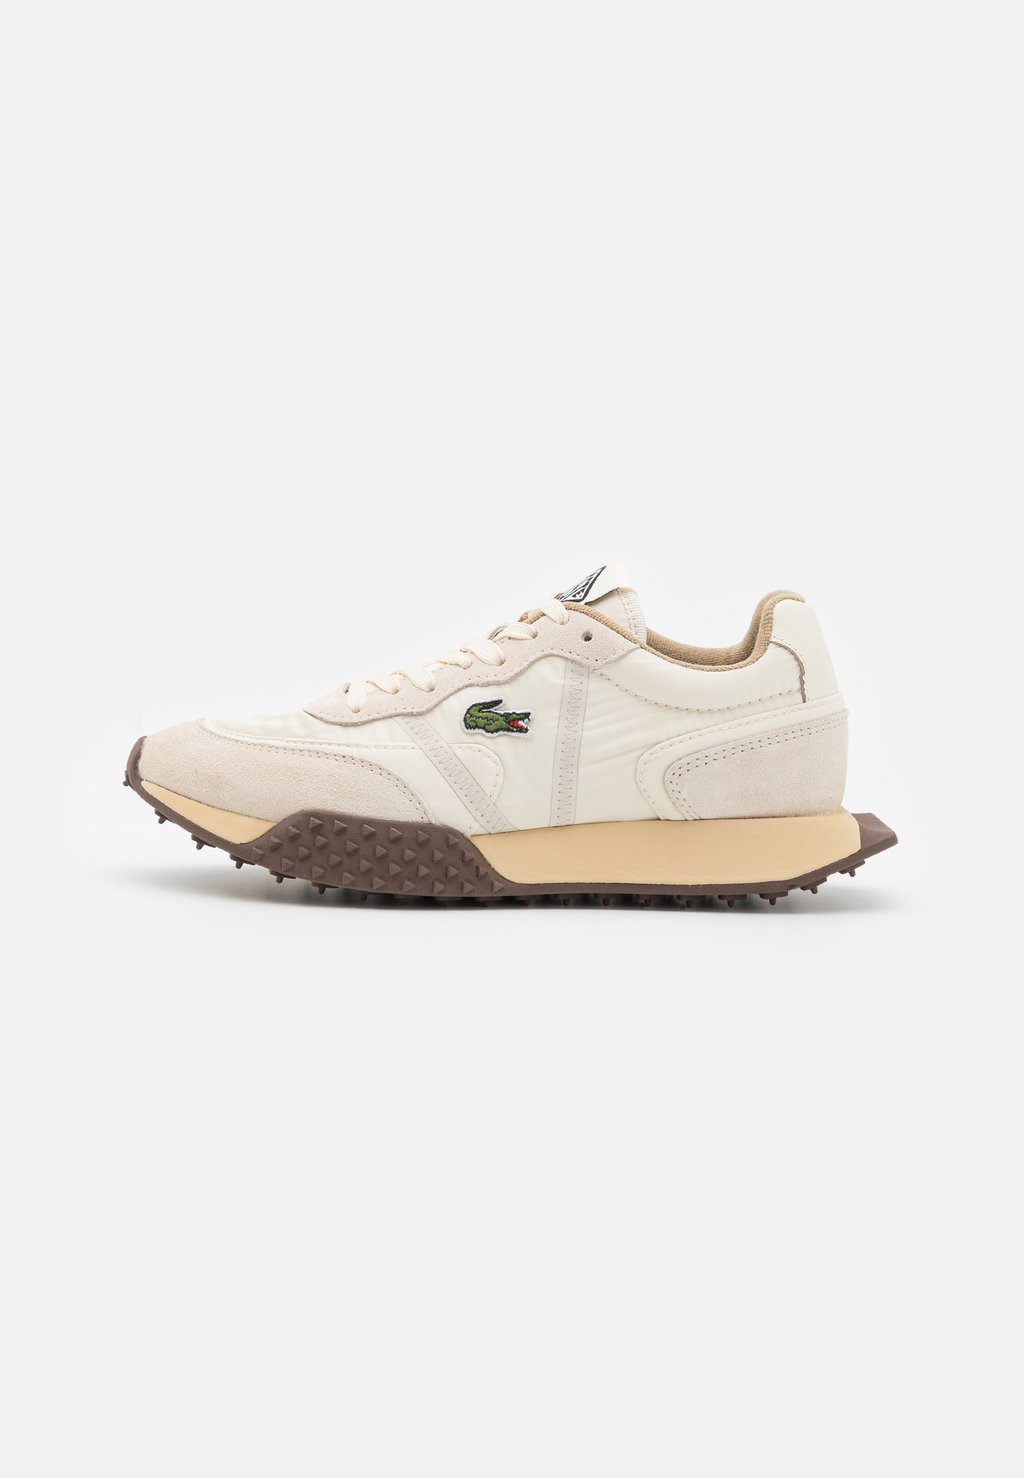 Кроссовки Lacoste L-SPIN DELUXE 3.0, цвет off white кроссовки lacoste deluxe white green